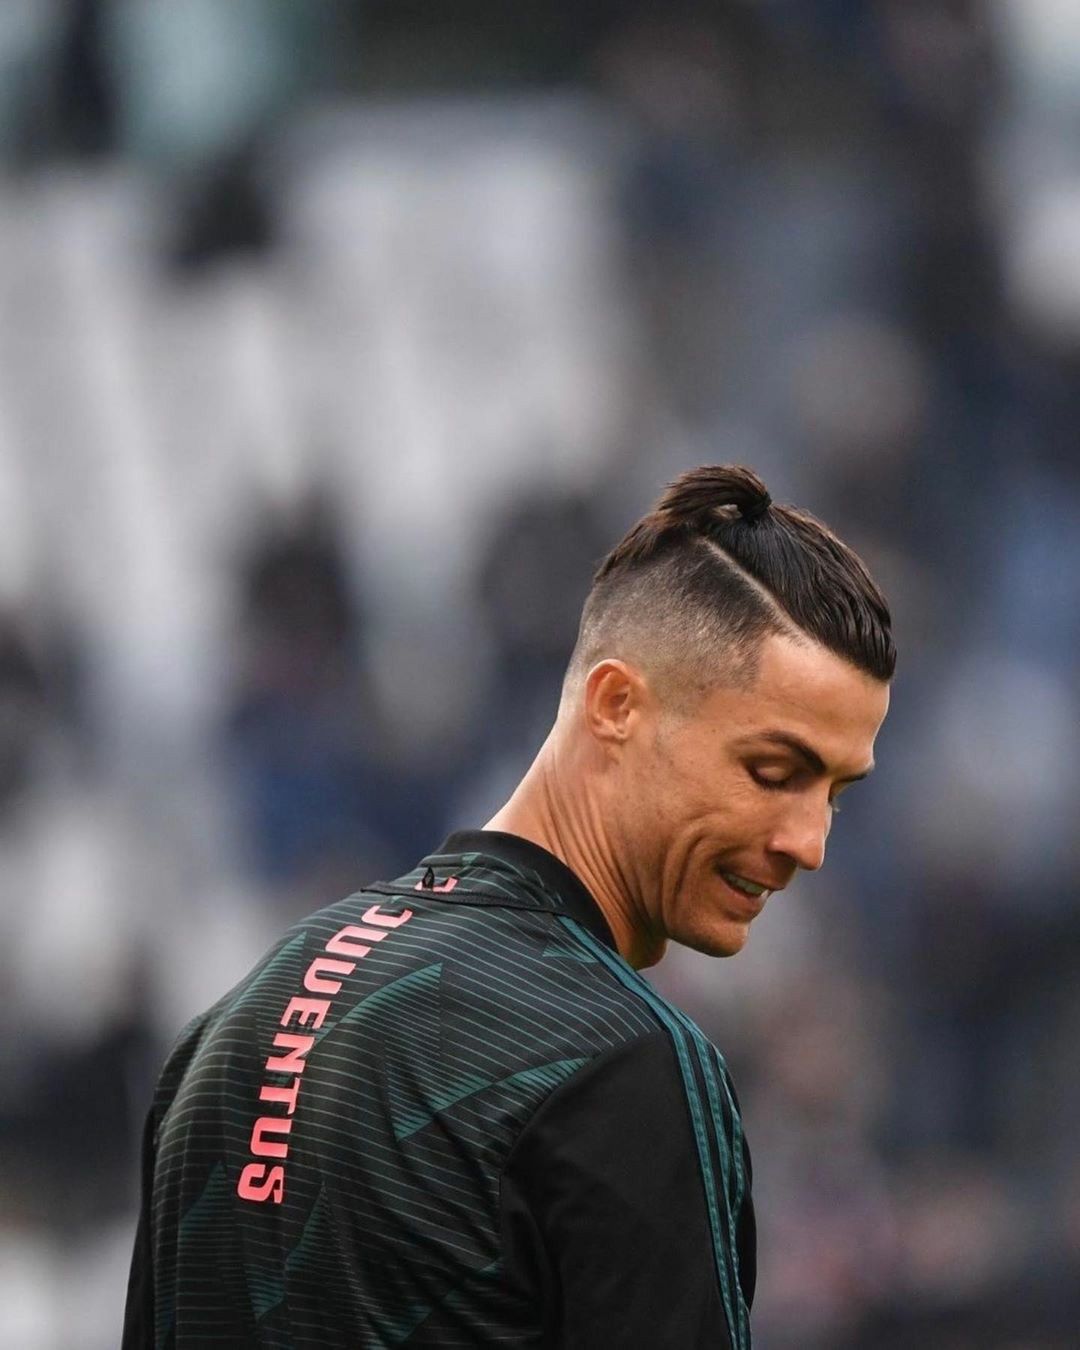 Cristiano Ronaldos changing hairstyles over the years